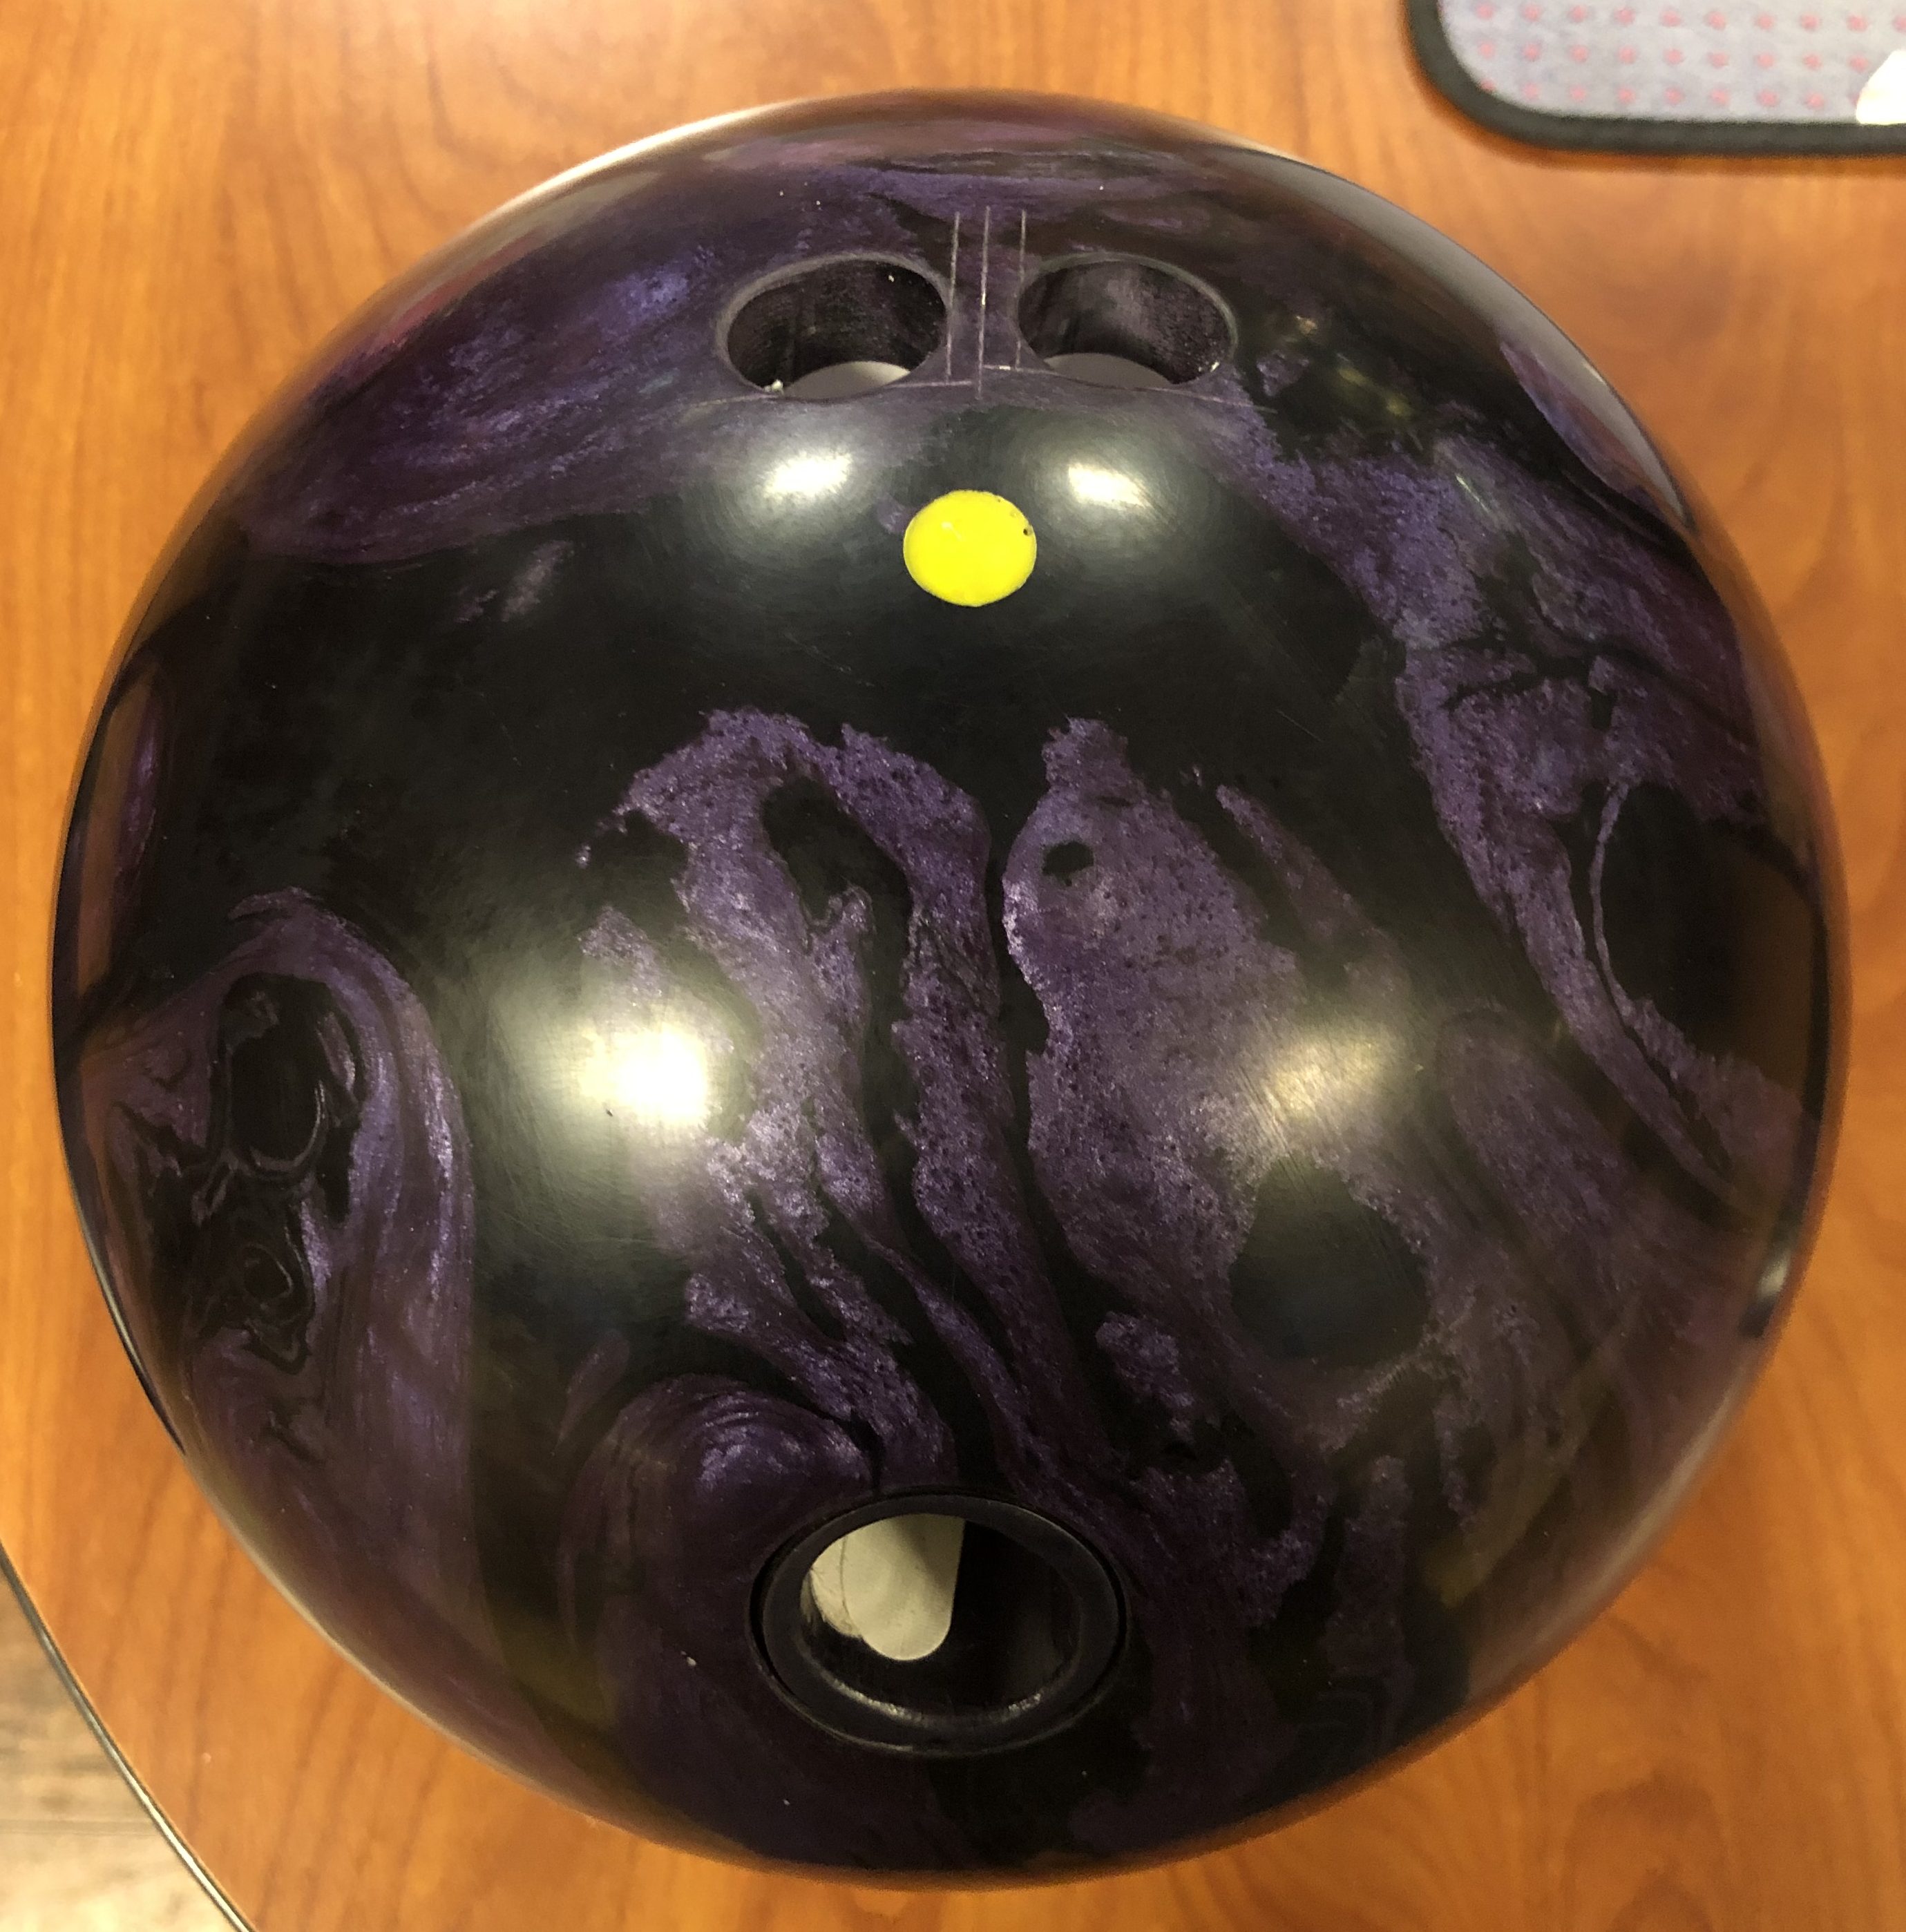 List 101+ Pictures Pictures Of A Bowling Ball Sharp